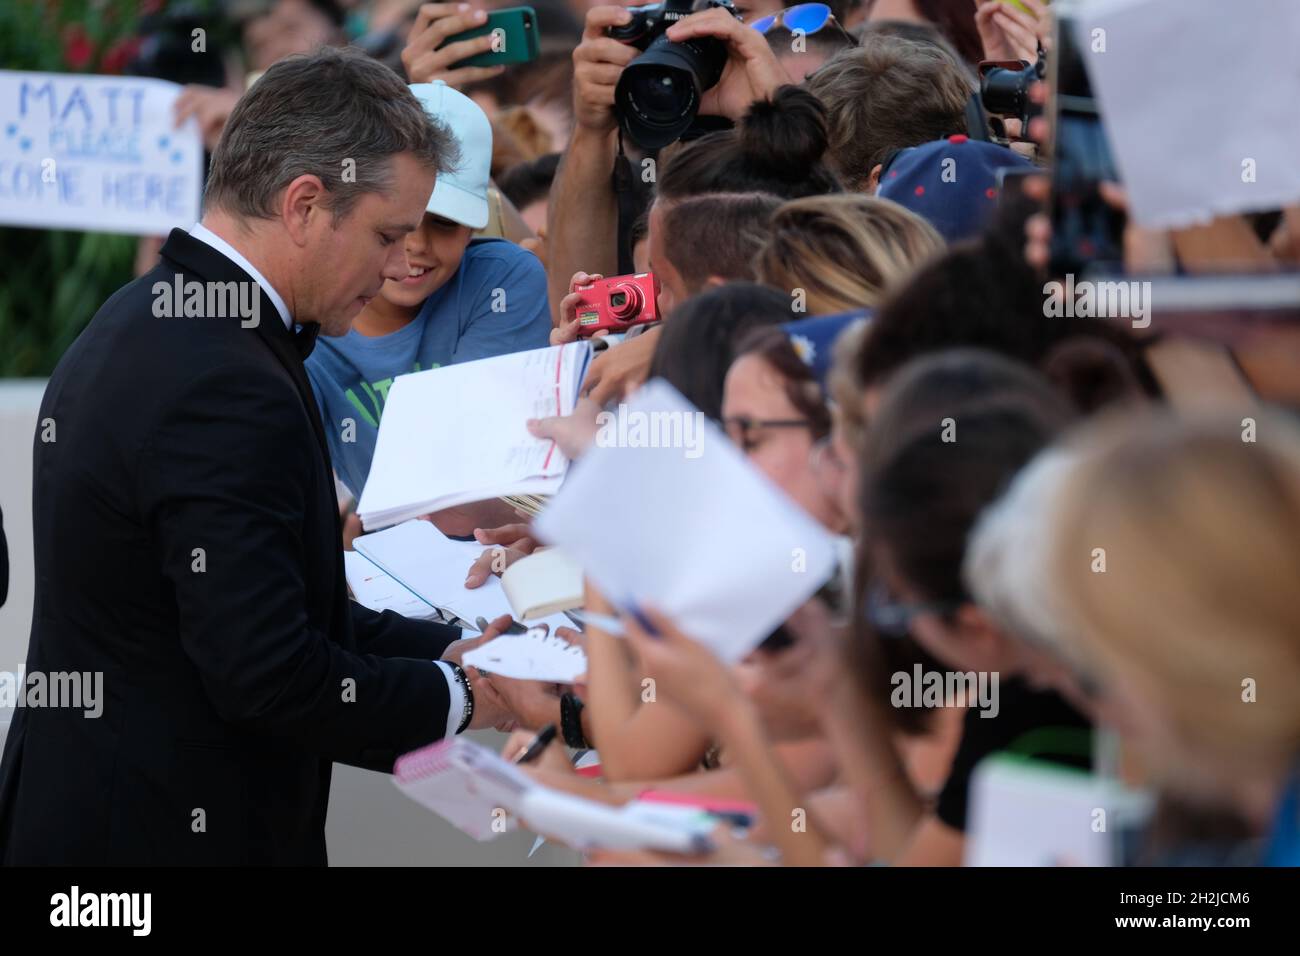 Actor Matt Damon signing autographs during a red carpet for the movie 'Downsizing' at the 74th Venice Film Festival in Venice, Italy August 30, 2017. Stock Photo